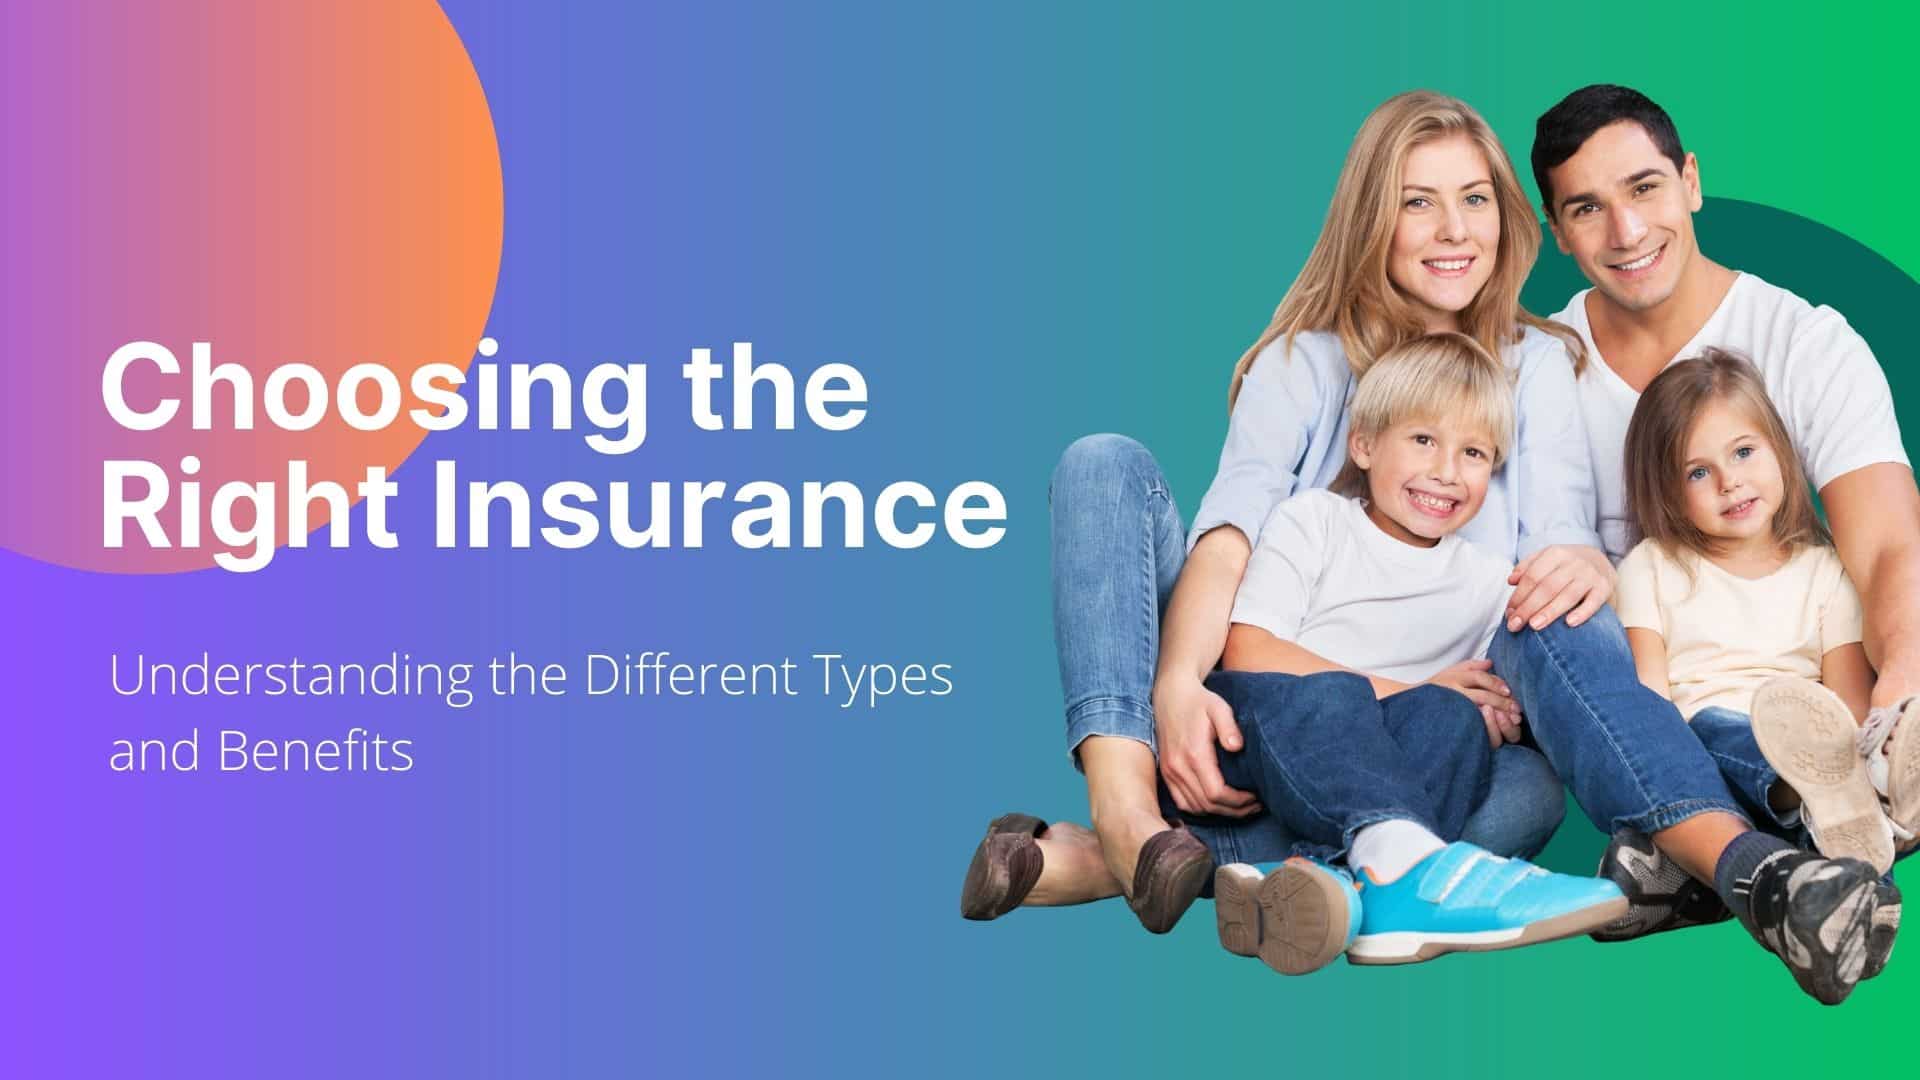 Choosing the Right Insurance Understanding the Different Types and Benefits